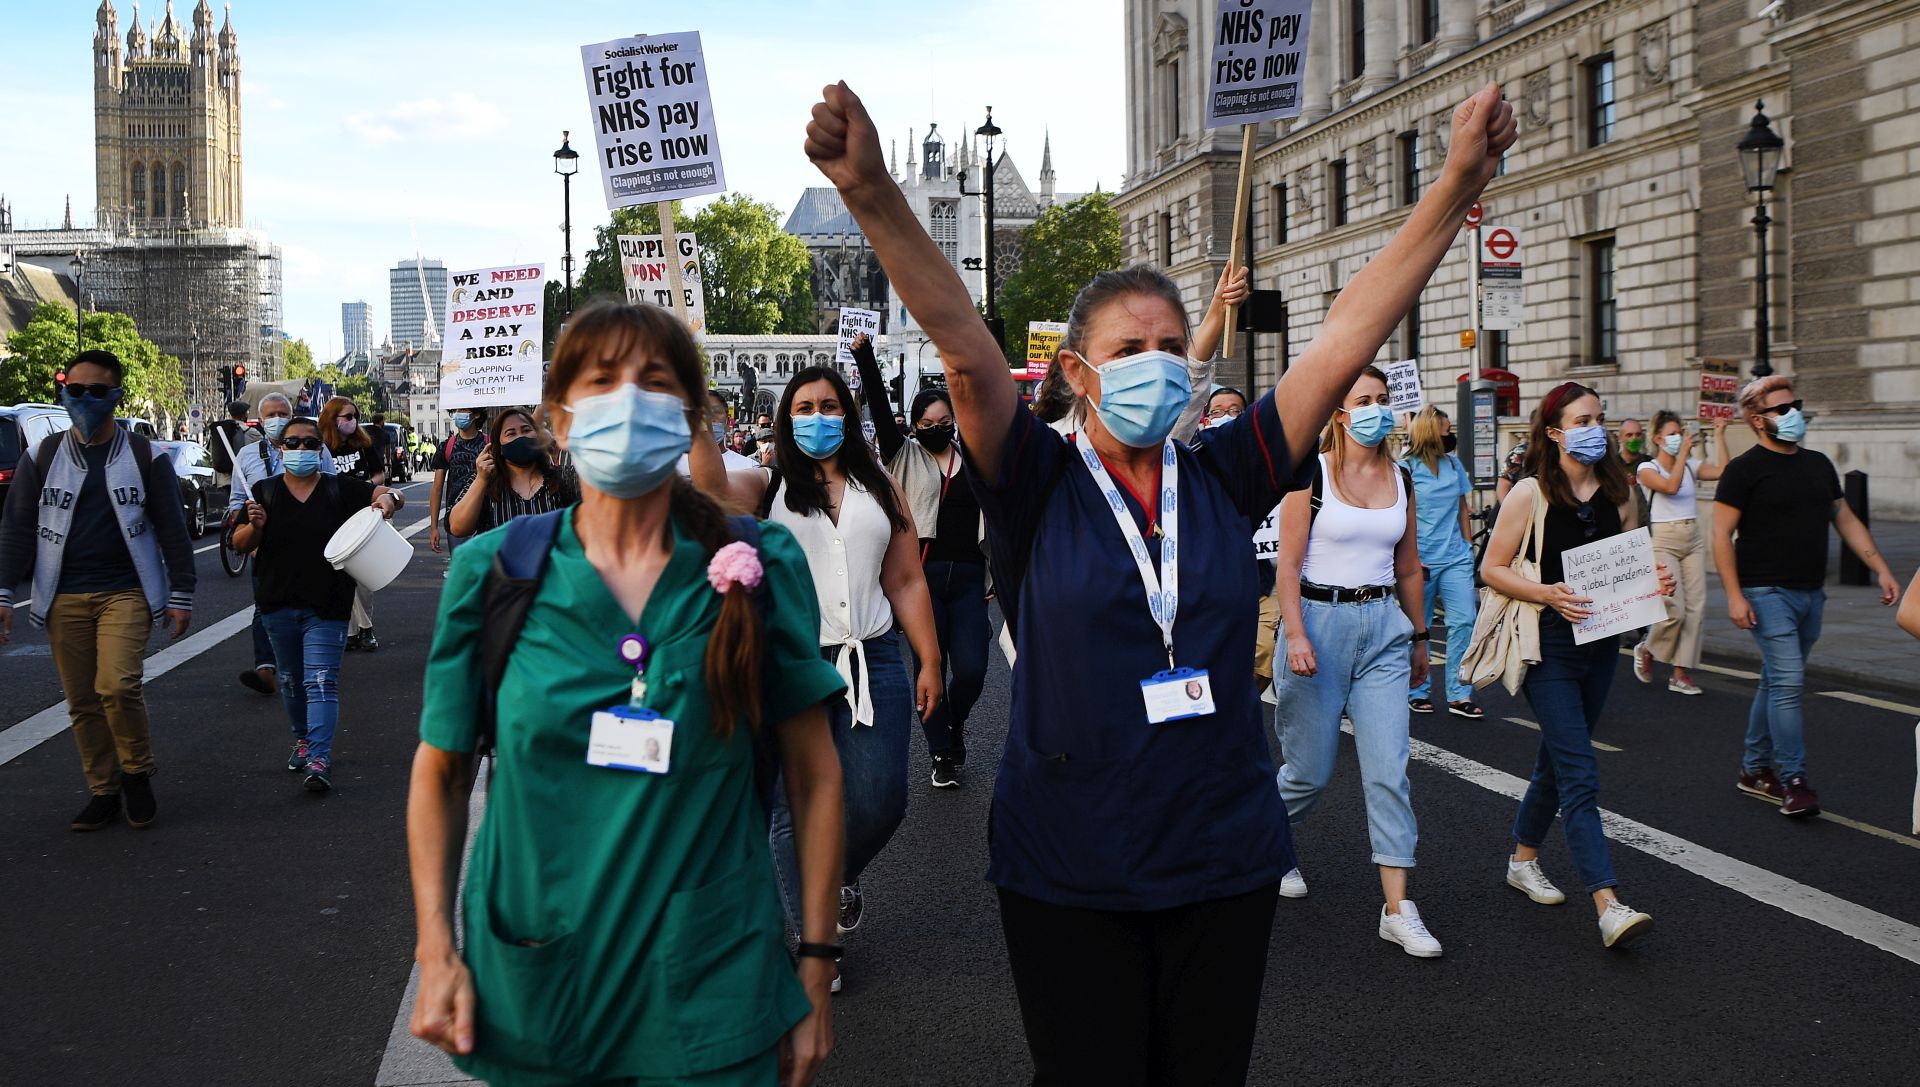 epa08572841 NHS workers wearing protective face masks stage a protest march to Downing Street in London, Britain, 29 July 2020. NHS nurses who have been on the frontline for some five months fighting Coronavirus marched to Downing Street calling for a pay rise.  EPA/ANDY RAIN